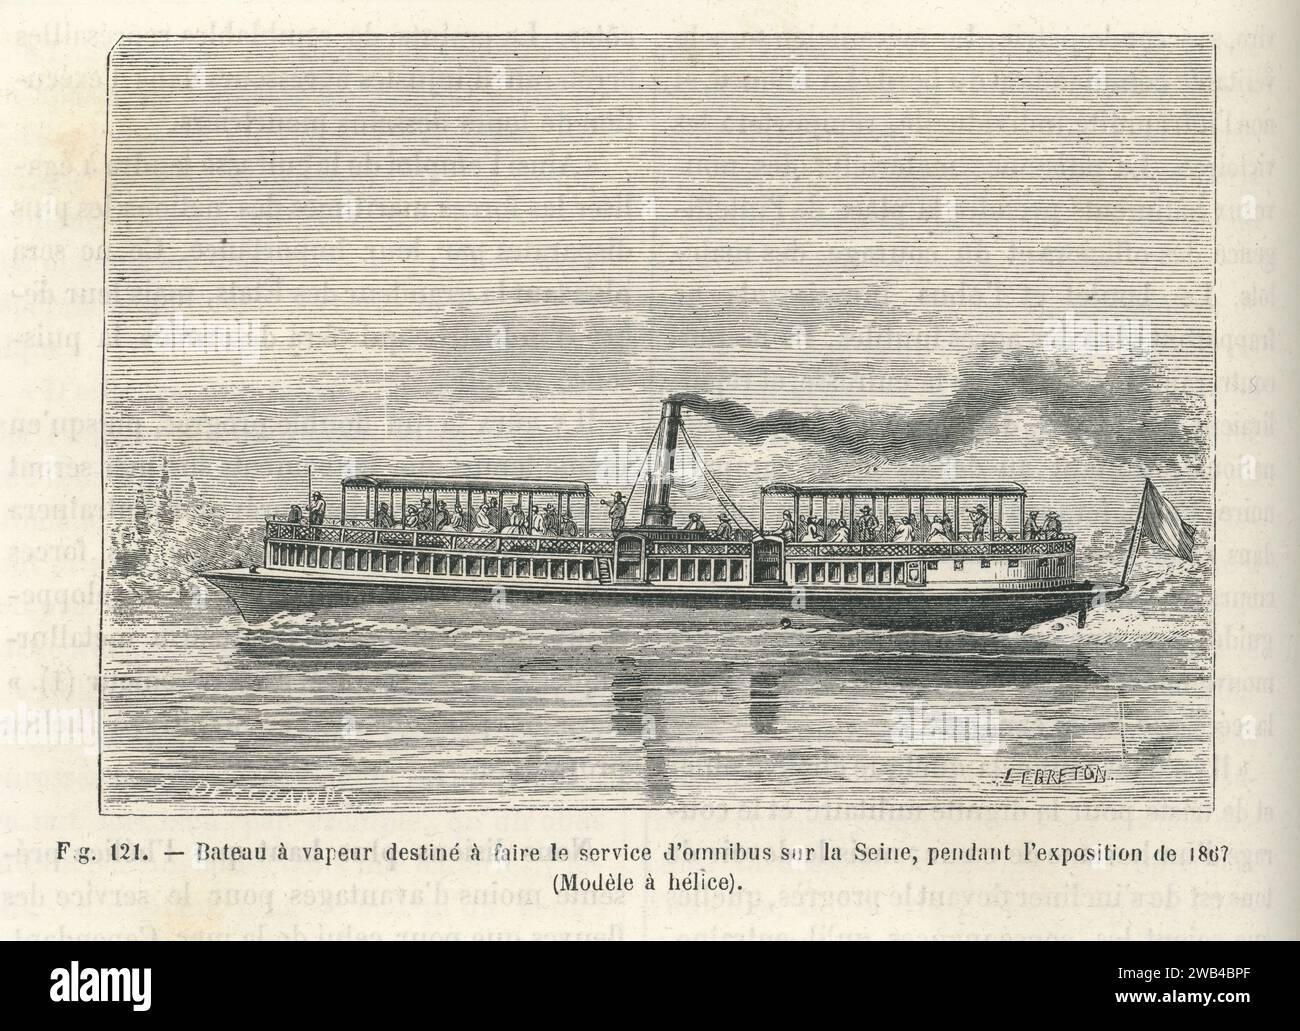 A propeller-driven steamboat designed to provide an omnibus service on the Seine in Paris during the 1867 World's Fair.  Illustration from 'Les Merveilles de la science ou description populaire des inventions modernes' written by Louis Figuier and published in 1867 by Furne, Jouvet et Cie. Stock Photo